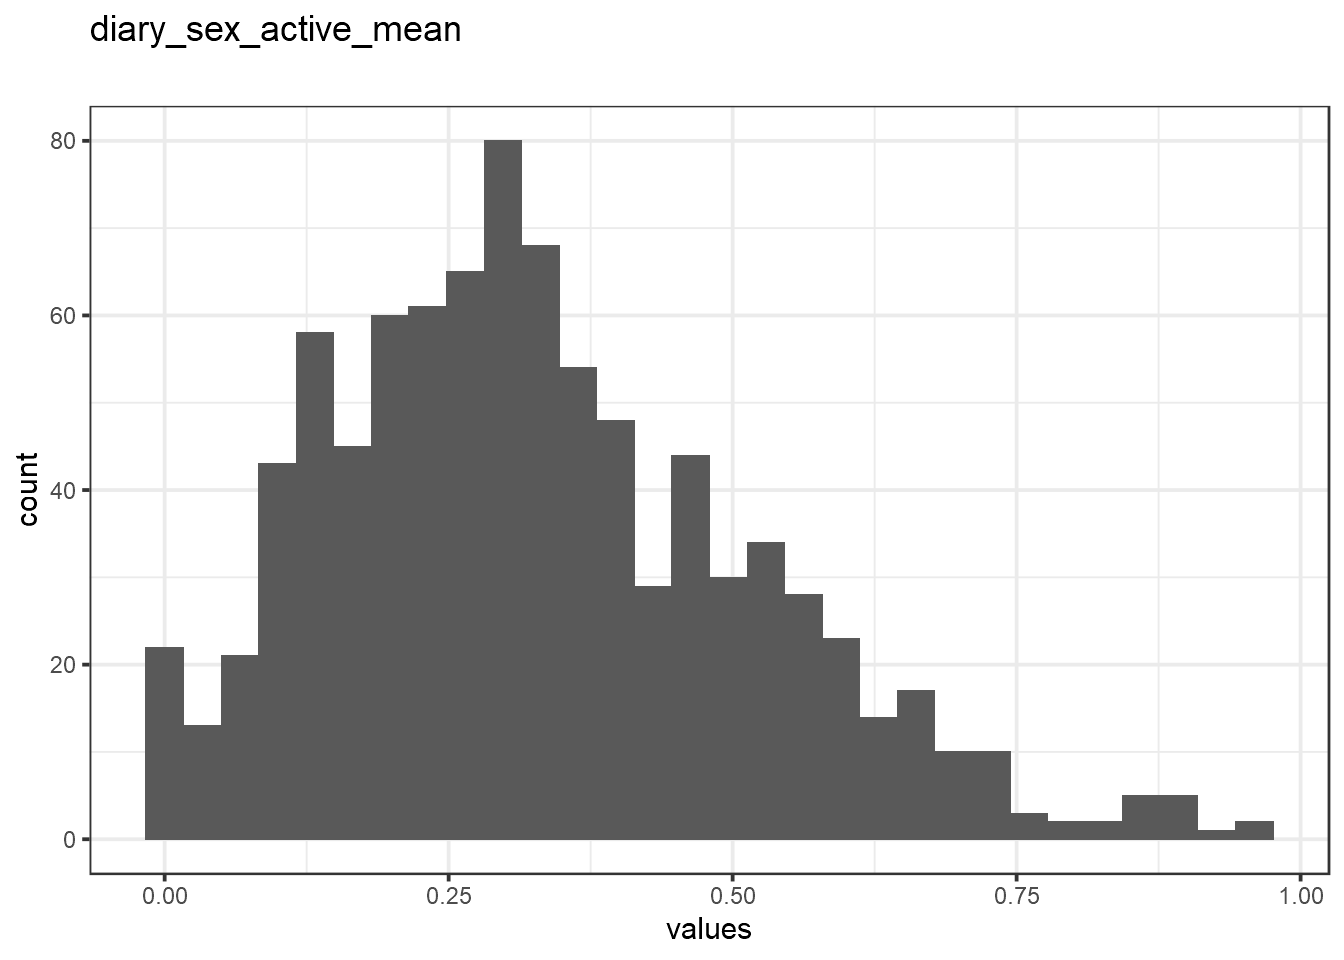 Distribution of values for diary_sex_active_mean